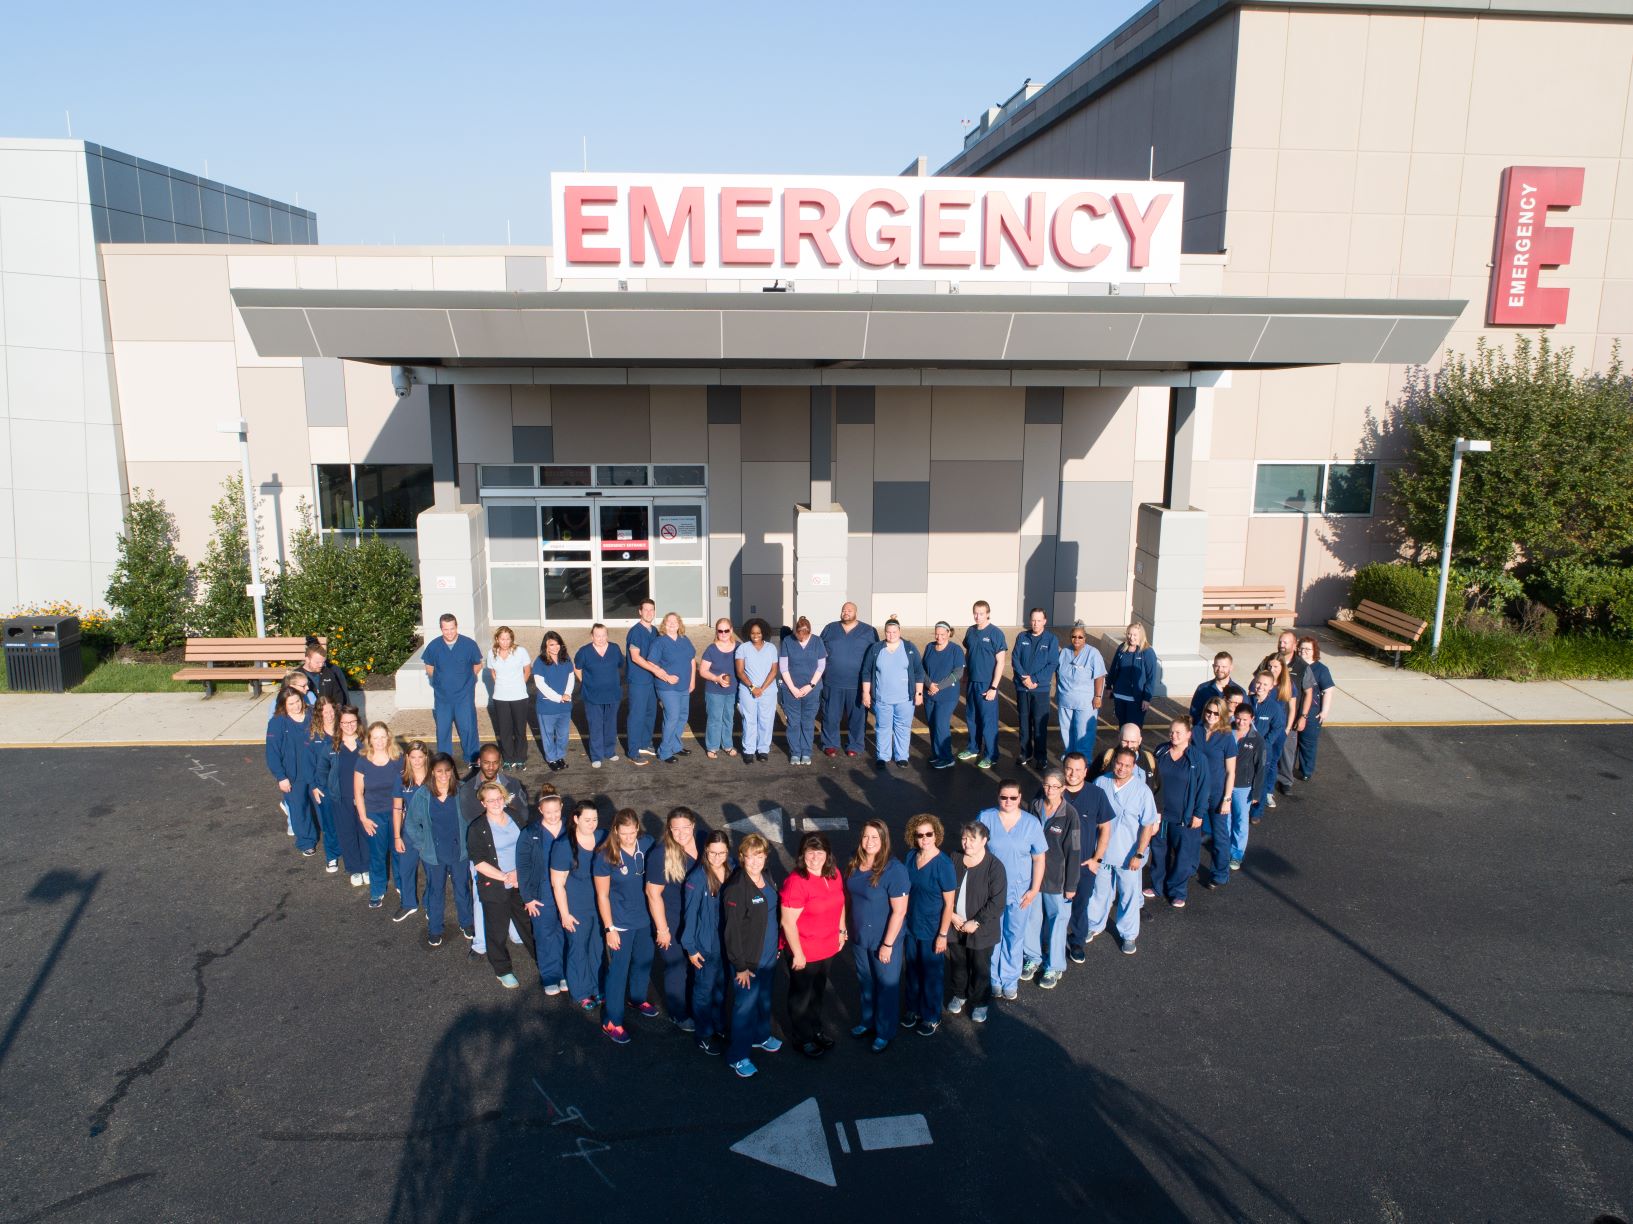 A group of health care workers standing in the shape of a heart